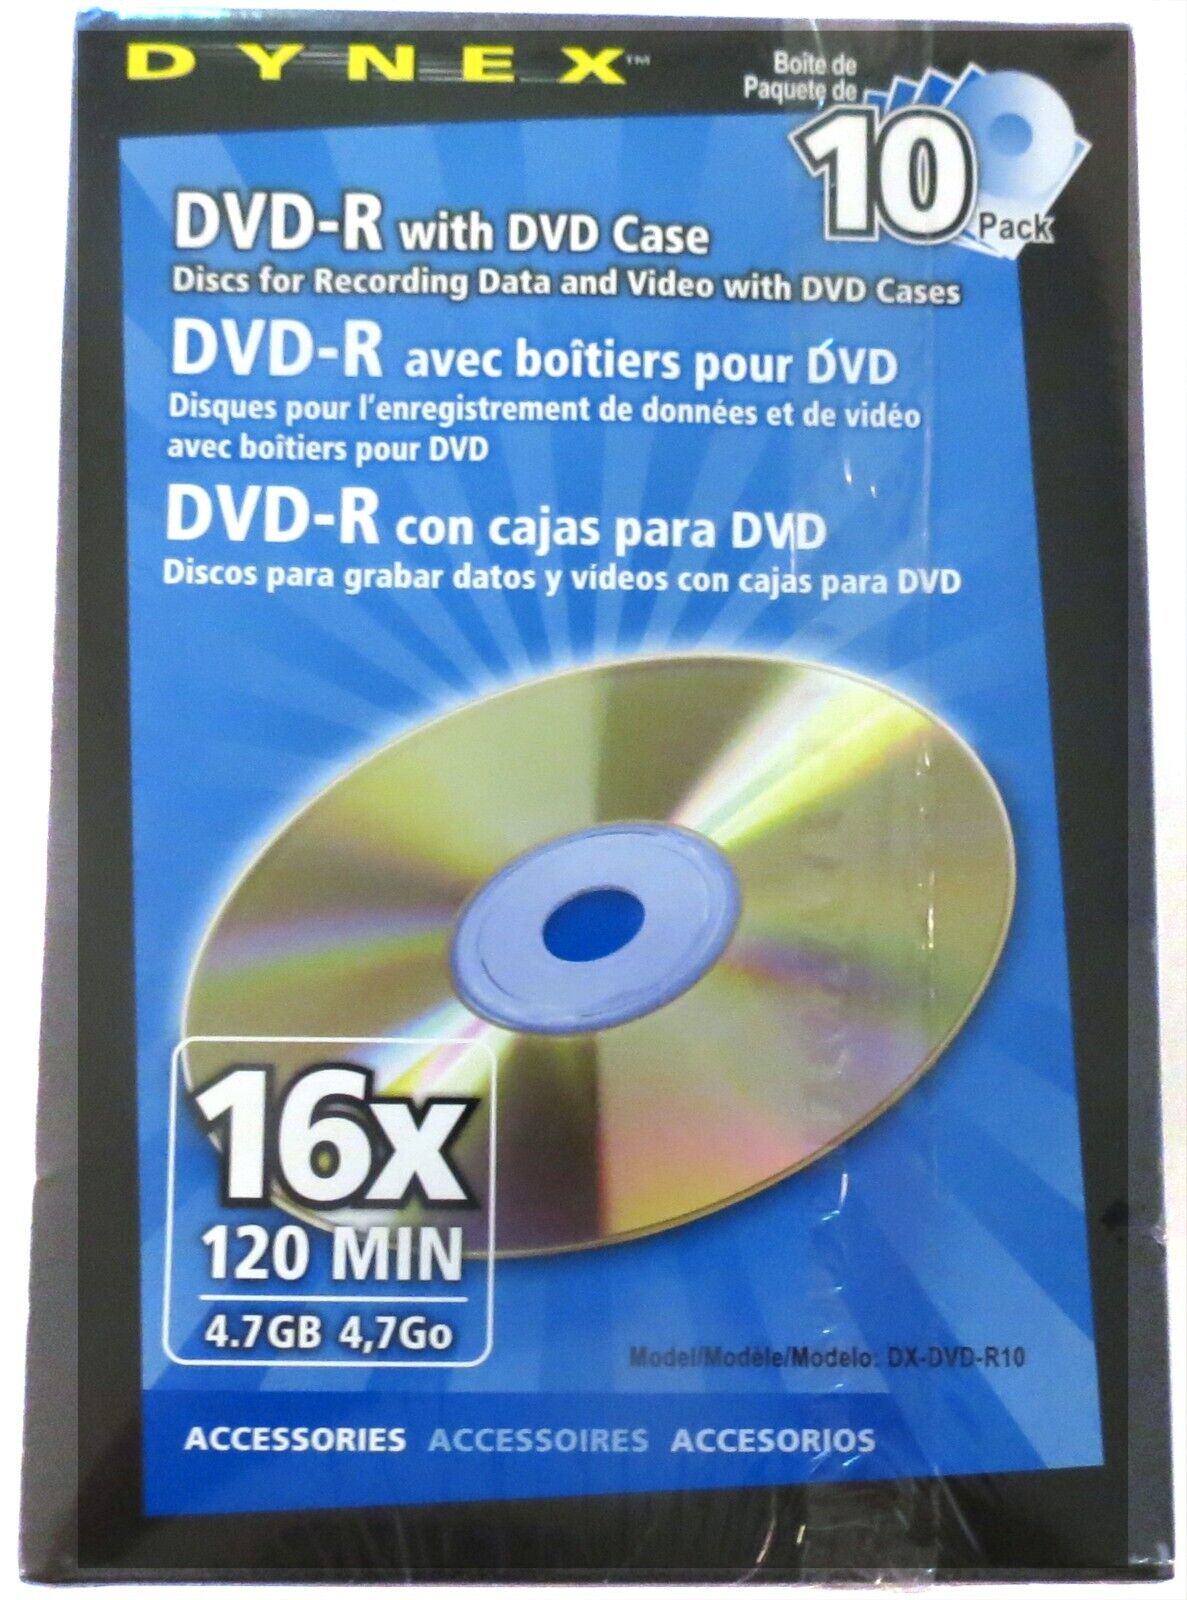 DVD -R Blank 10 Pack With Cases by Dynex 16x 120 Min 4.7 GB New Sealed